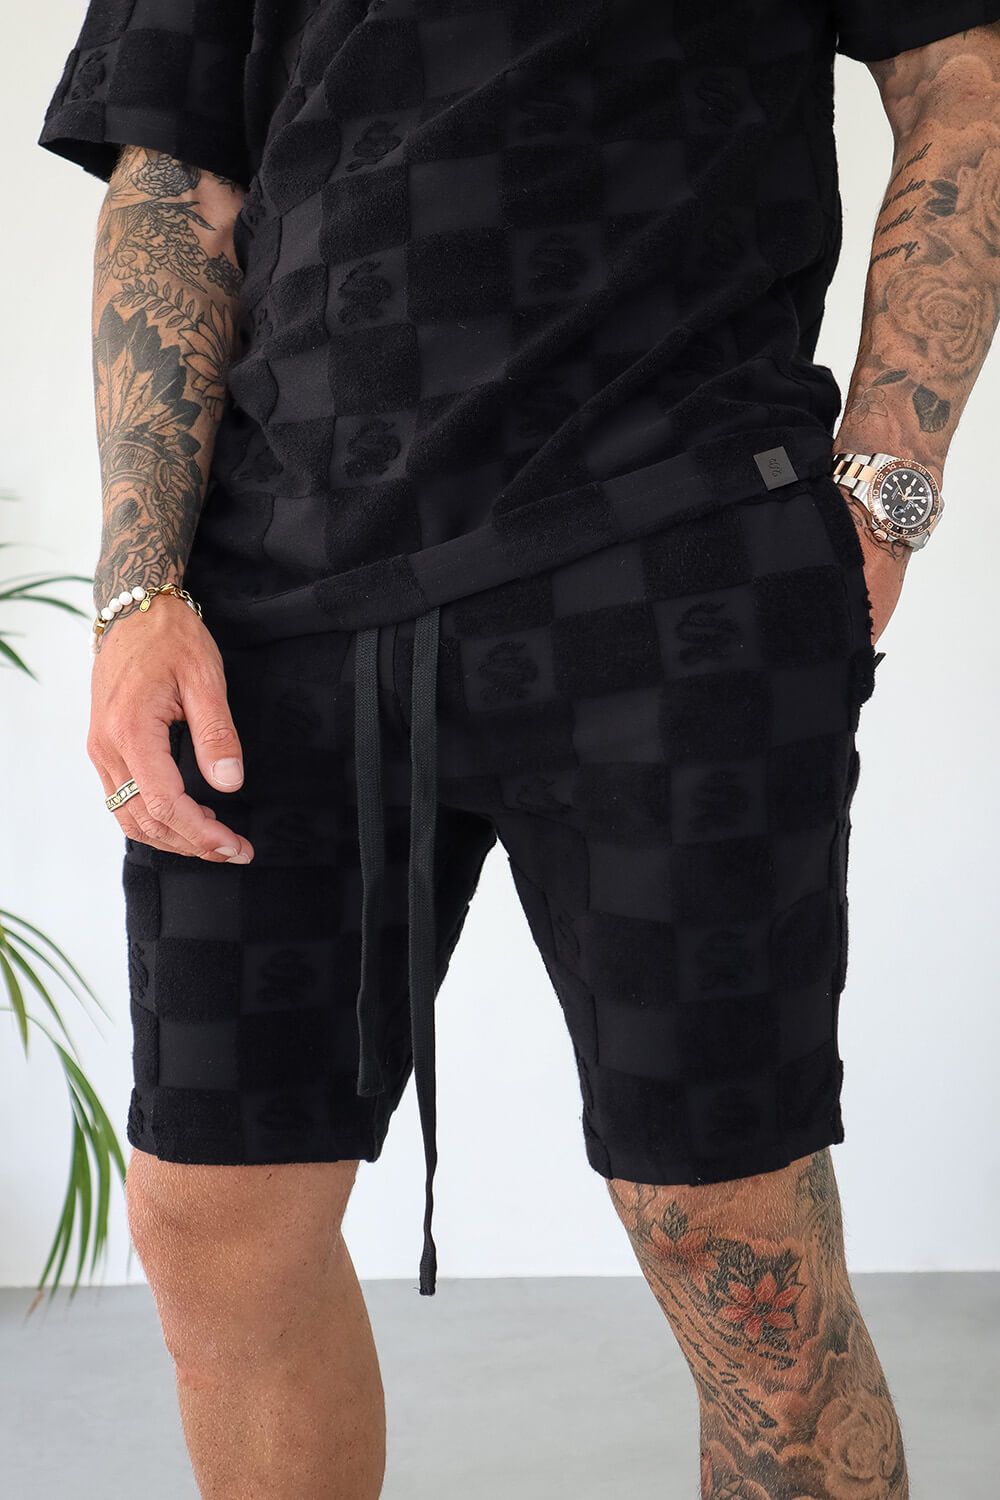 Sinners Attire Checkerboard Towelling Shorts